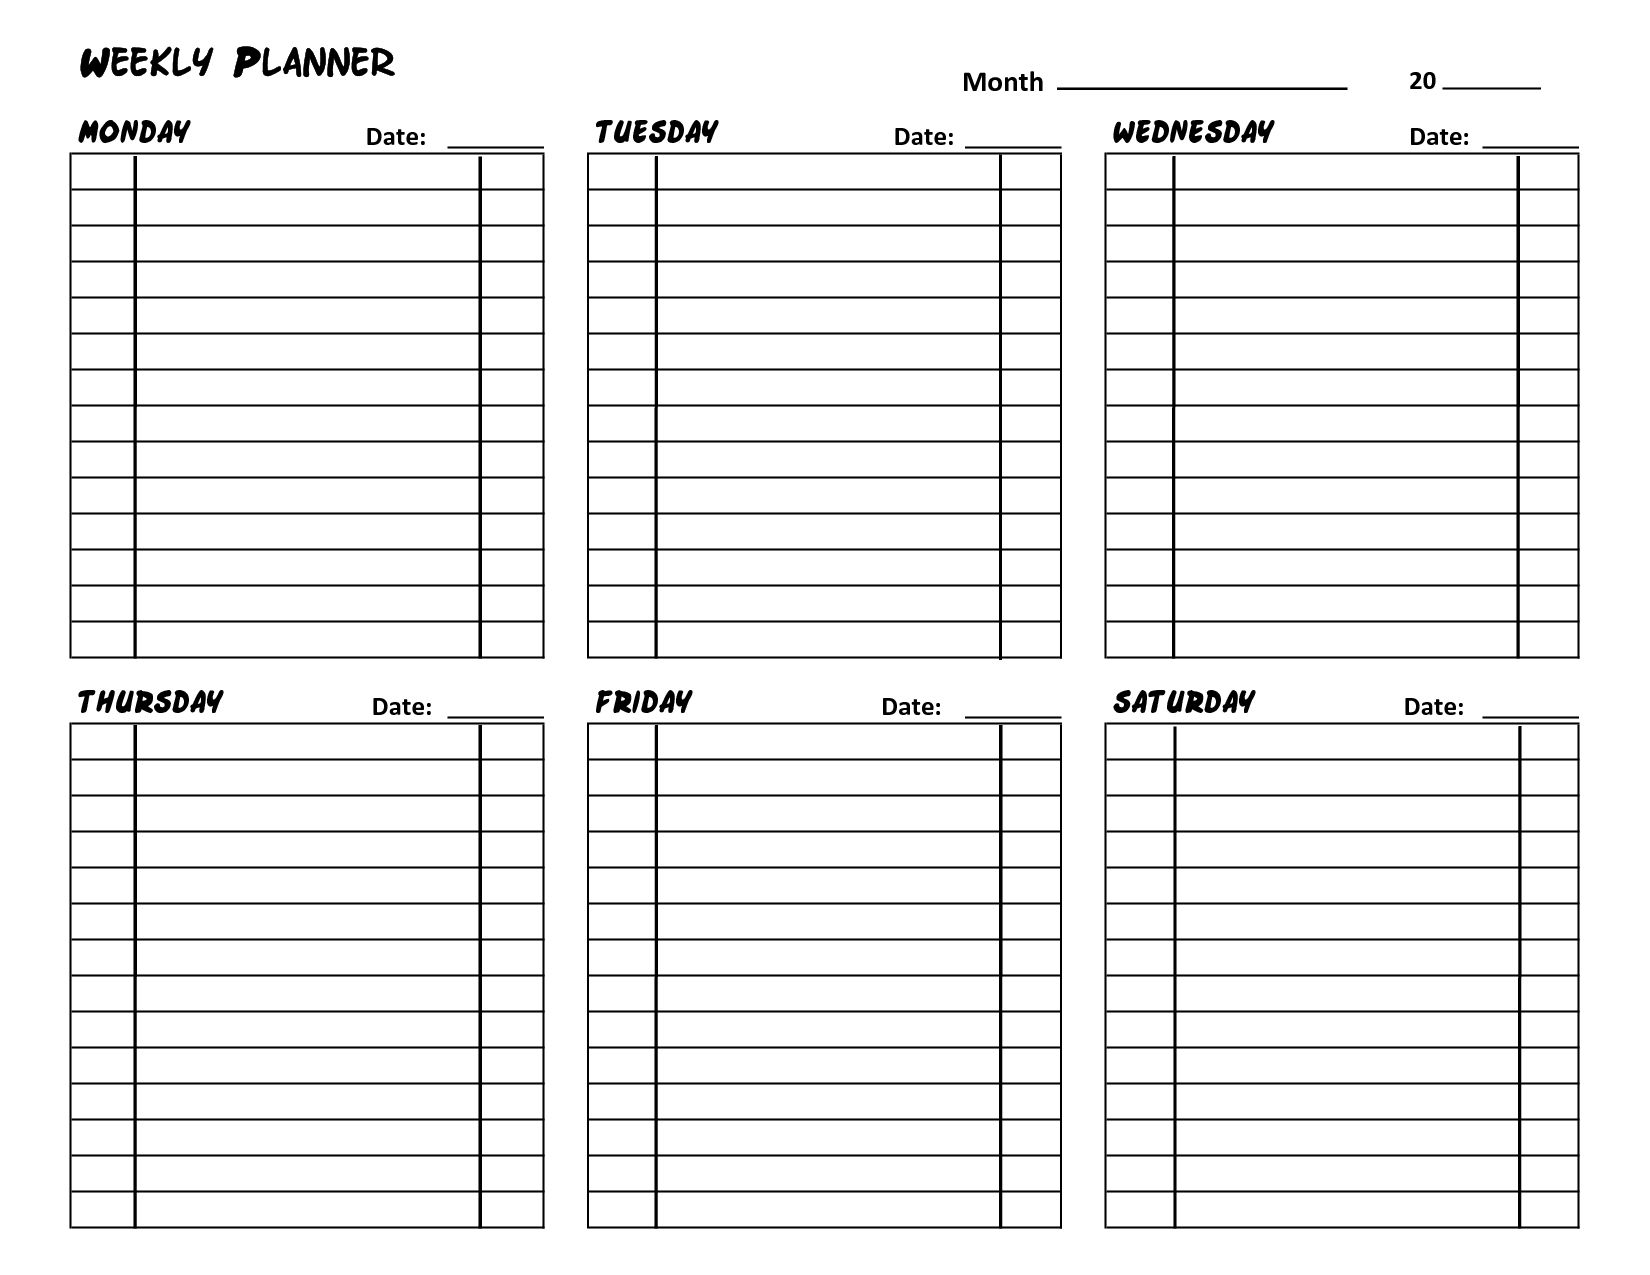 Free Printable Daily Calendar With Time Slots  Template pertaining to Daily Calendar With Time Slots Template